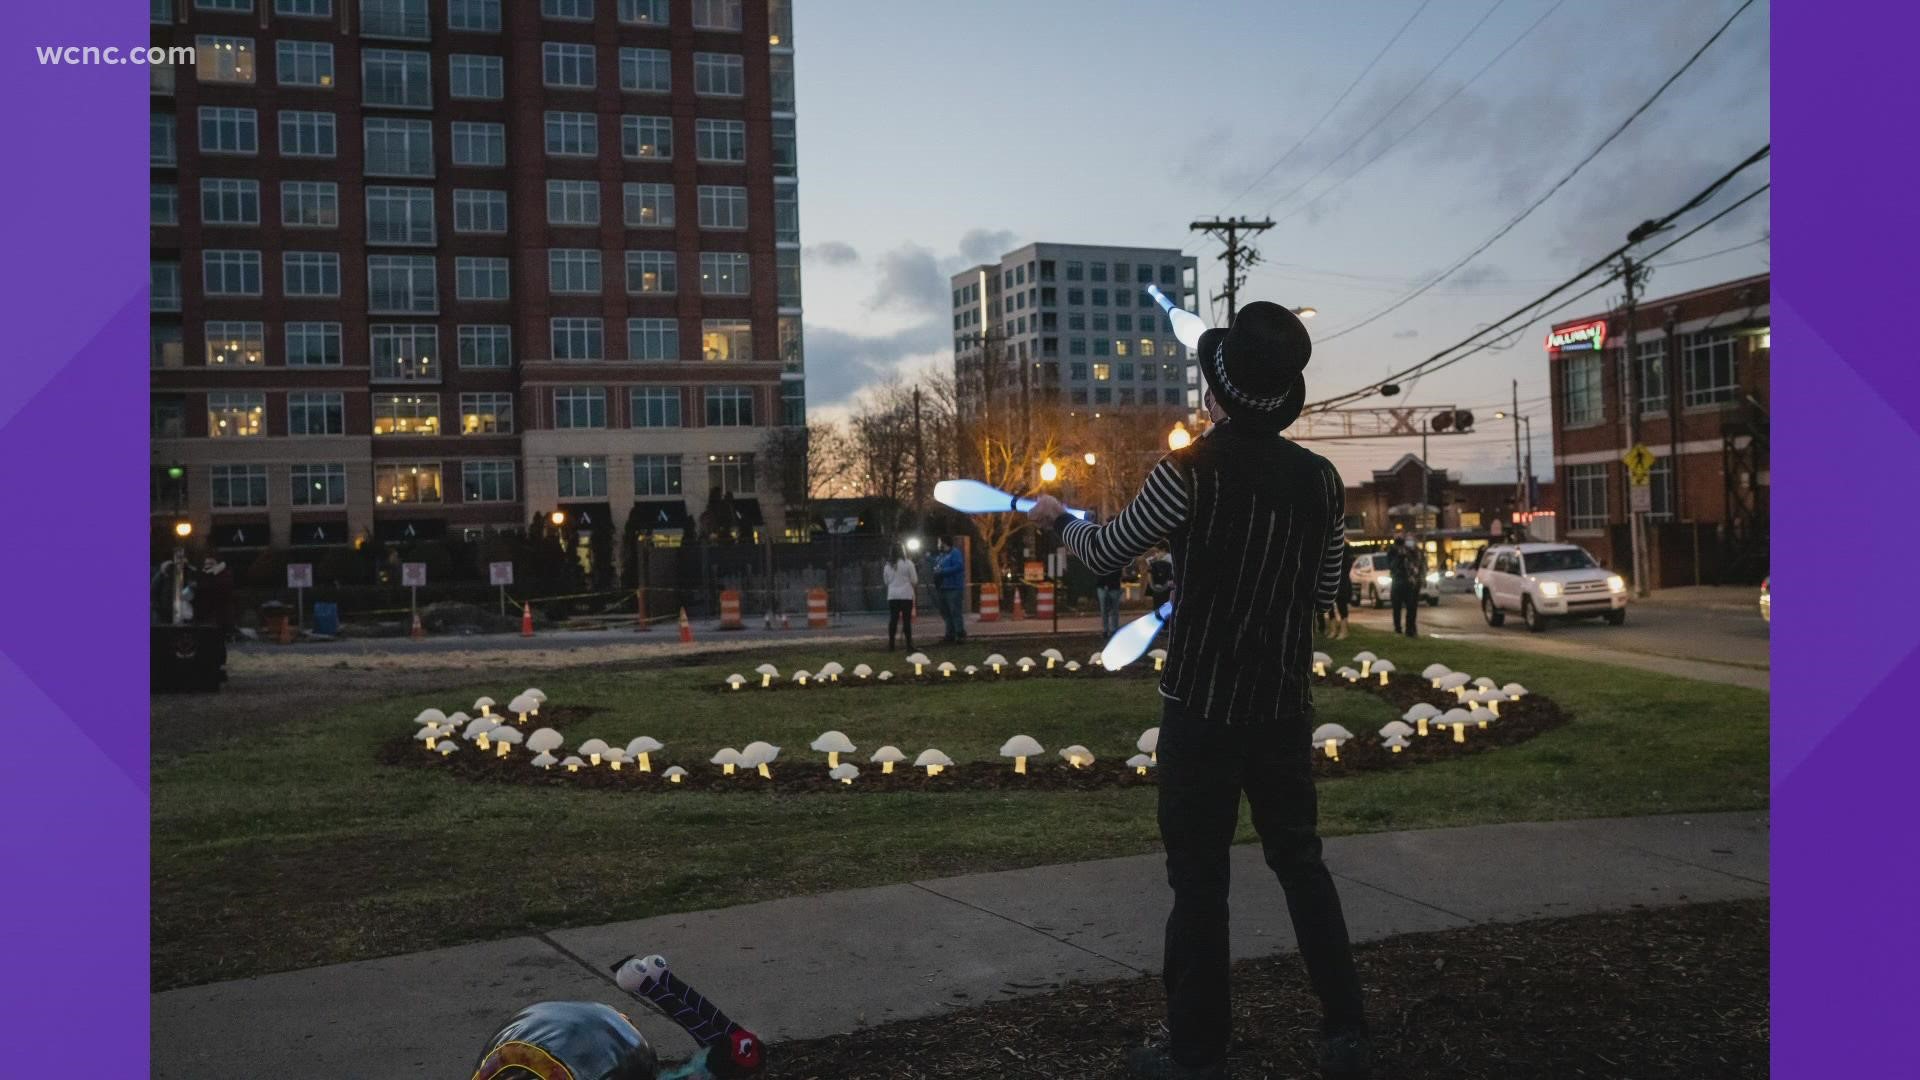 The artwork will be illuminated at dusk each night to create a magical interactive experience in South End.